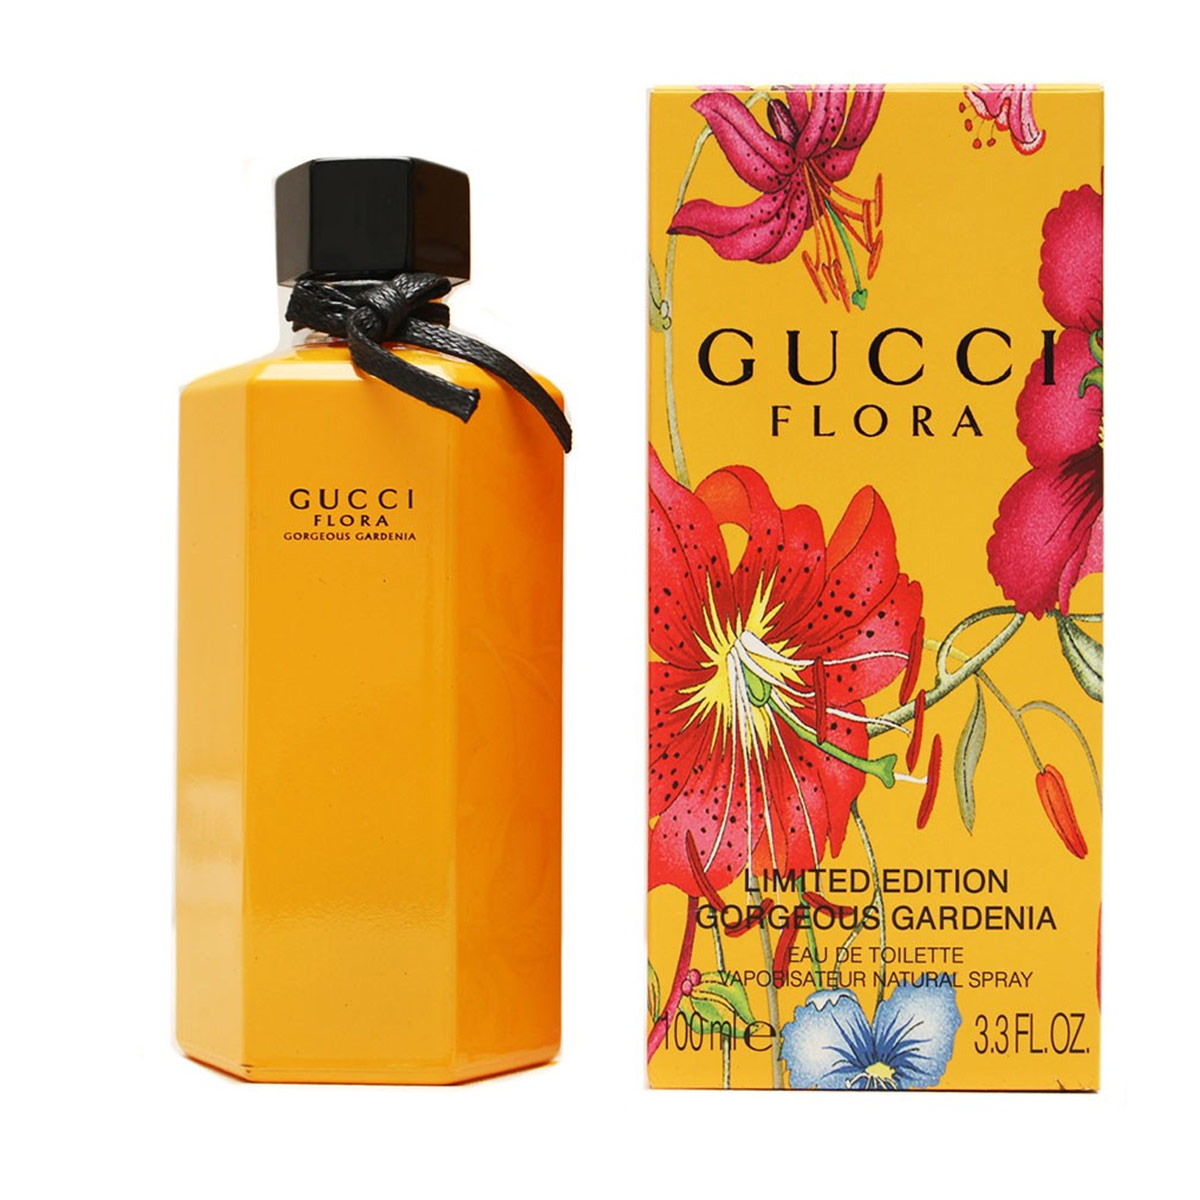 Vochtigheid Continu bungeejumpen gucci yellow bottle perfume for Sale OFF 64%